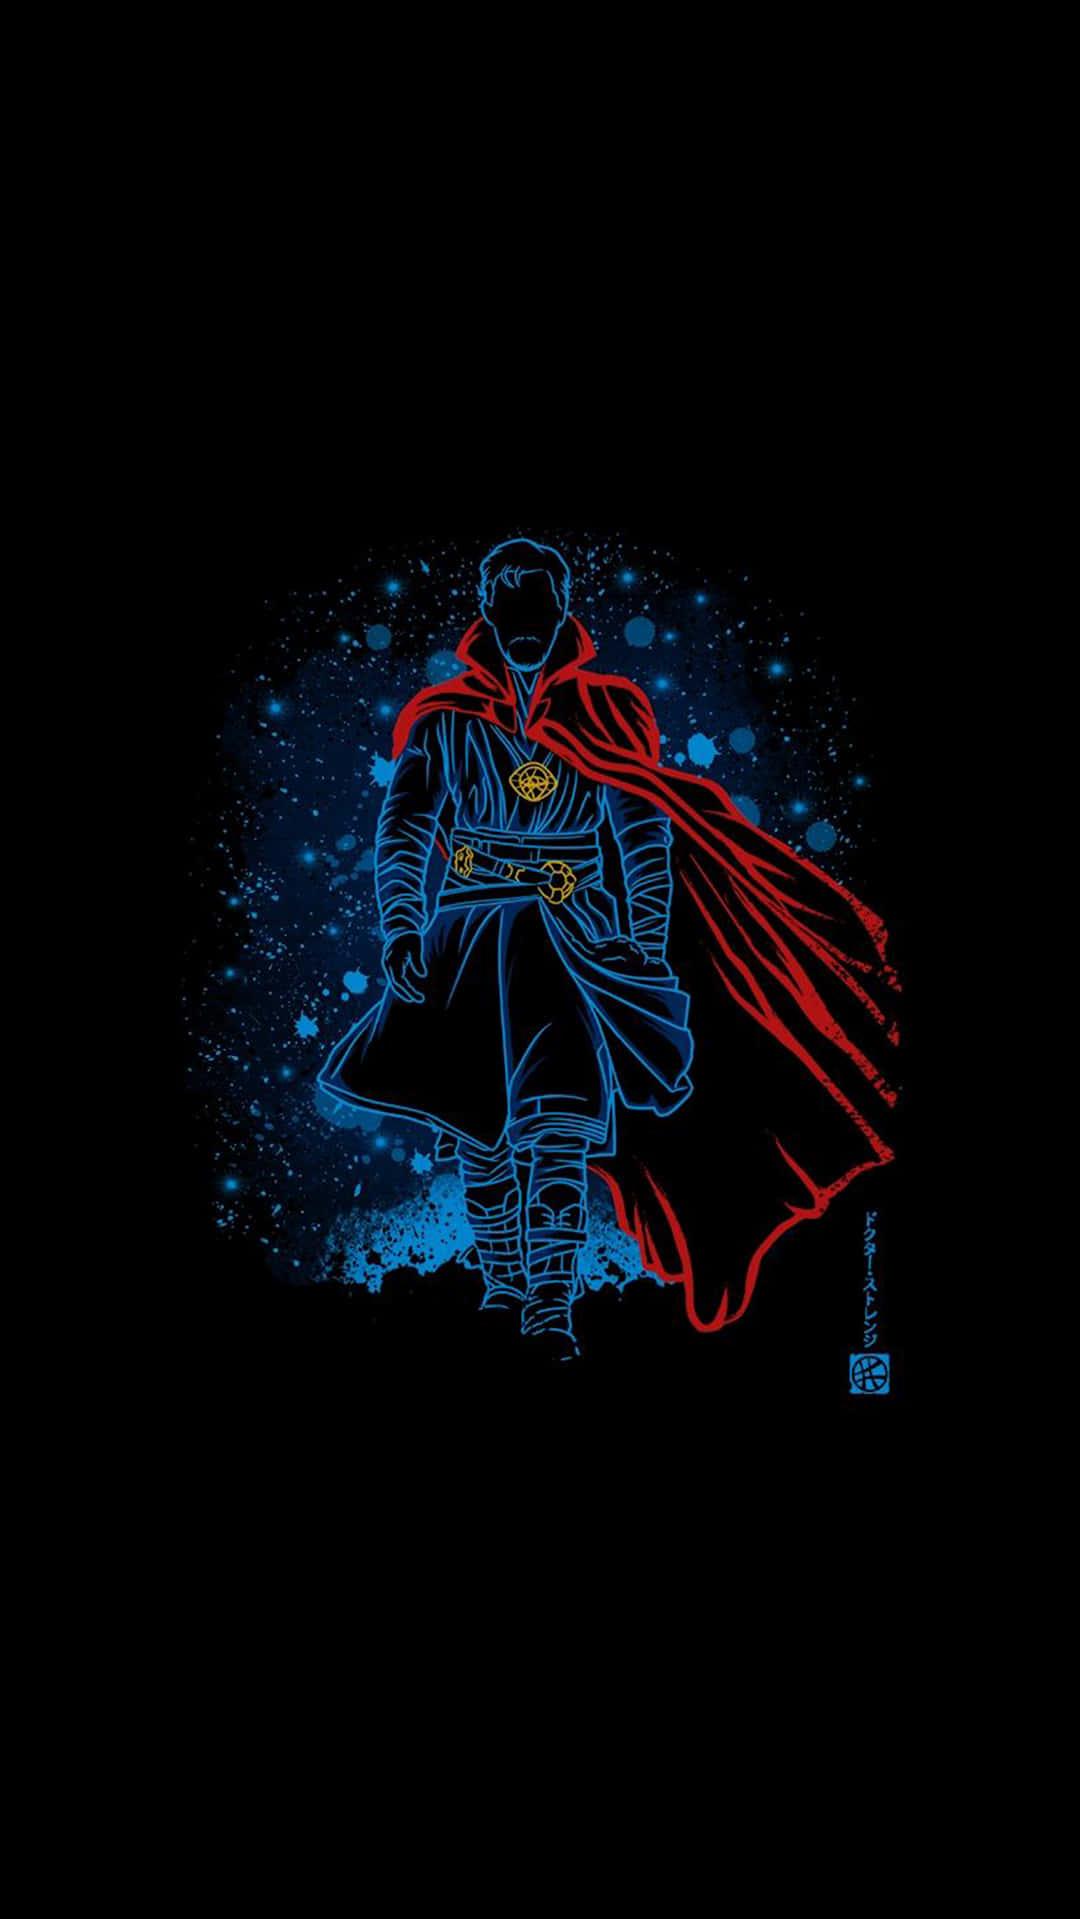 Super Power Your Phone With Doctor Strange Wallpaper